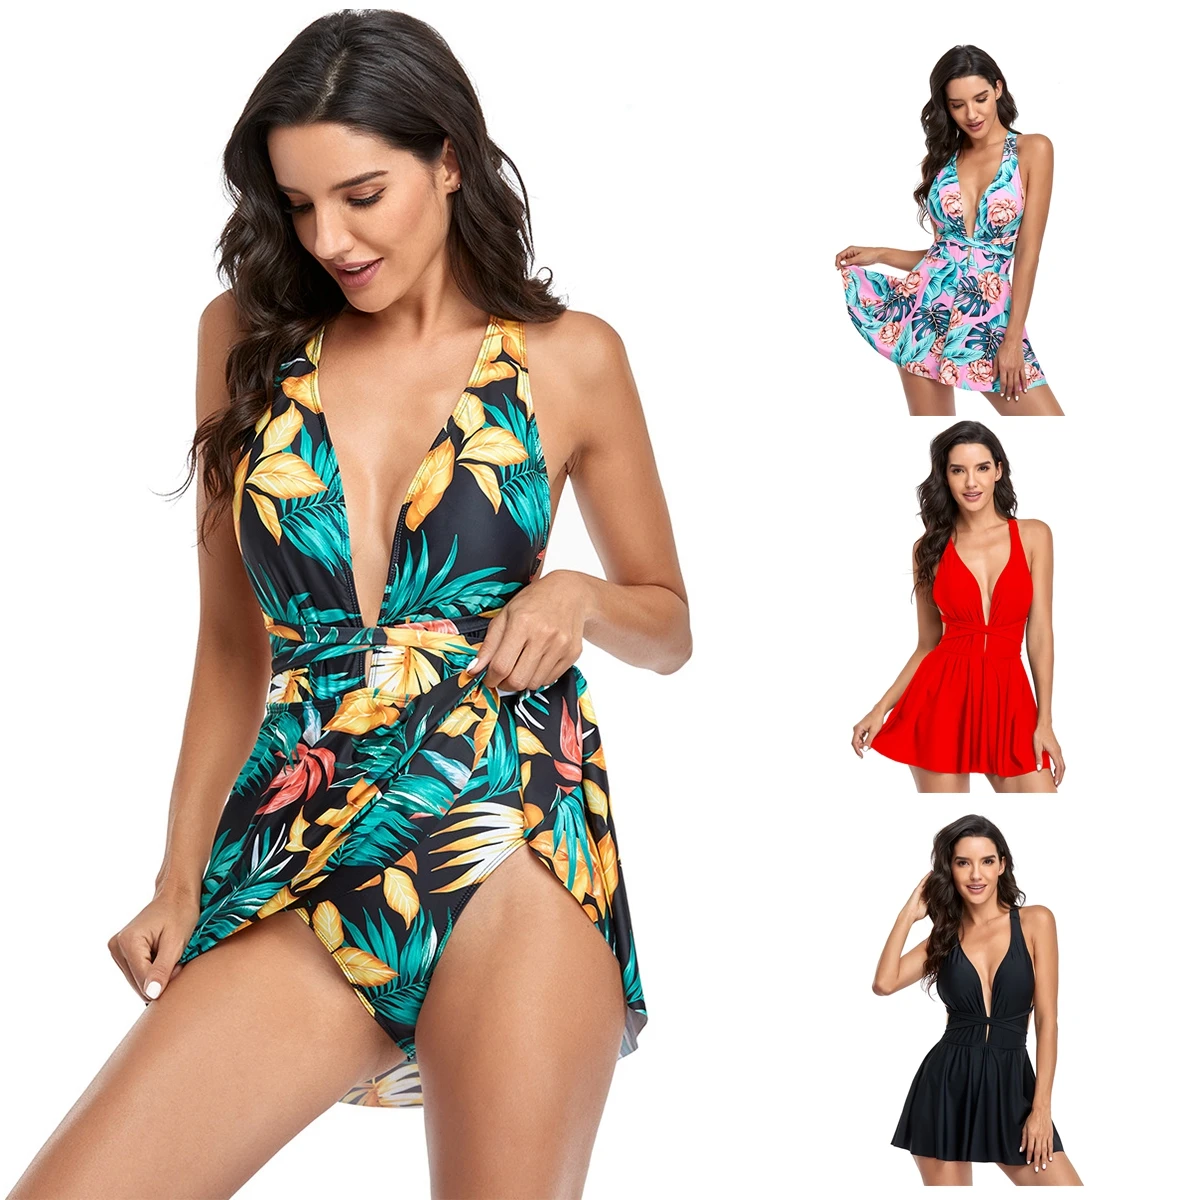 

XMTOPYE 2021 Sexy One Piece Swimsuit With Skirt Cross Bandage Beachwear Deep V Print Solid Bathing Suit see through Women